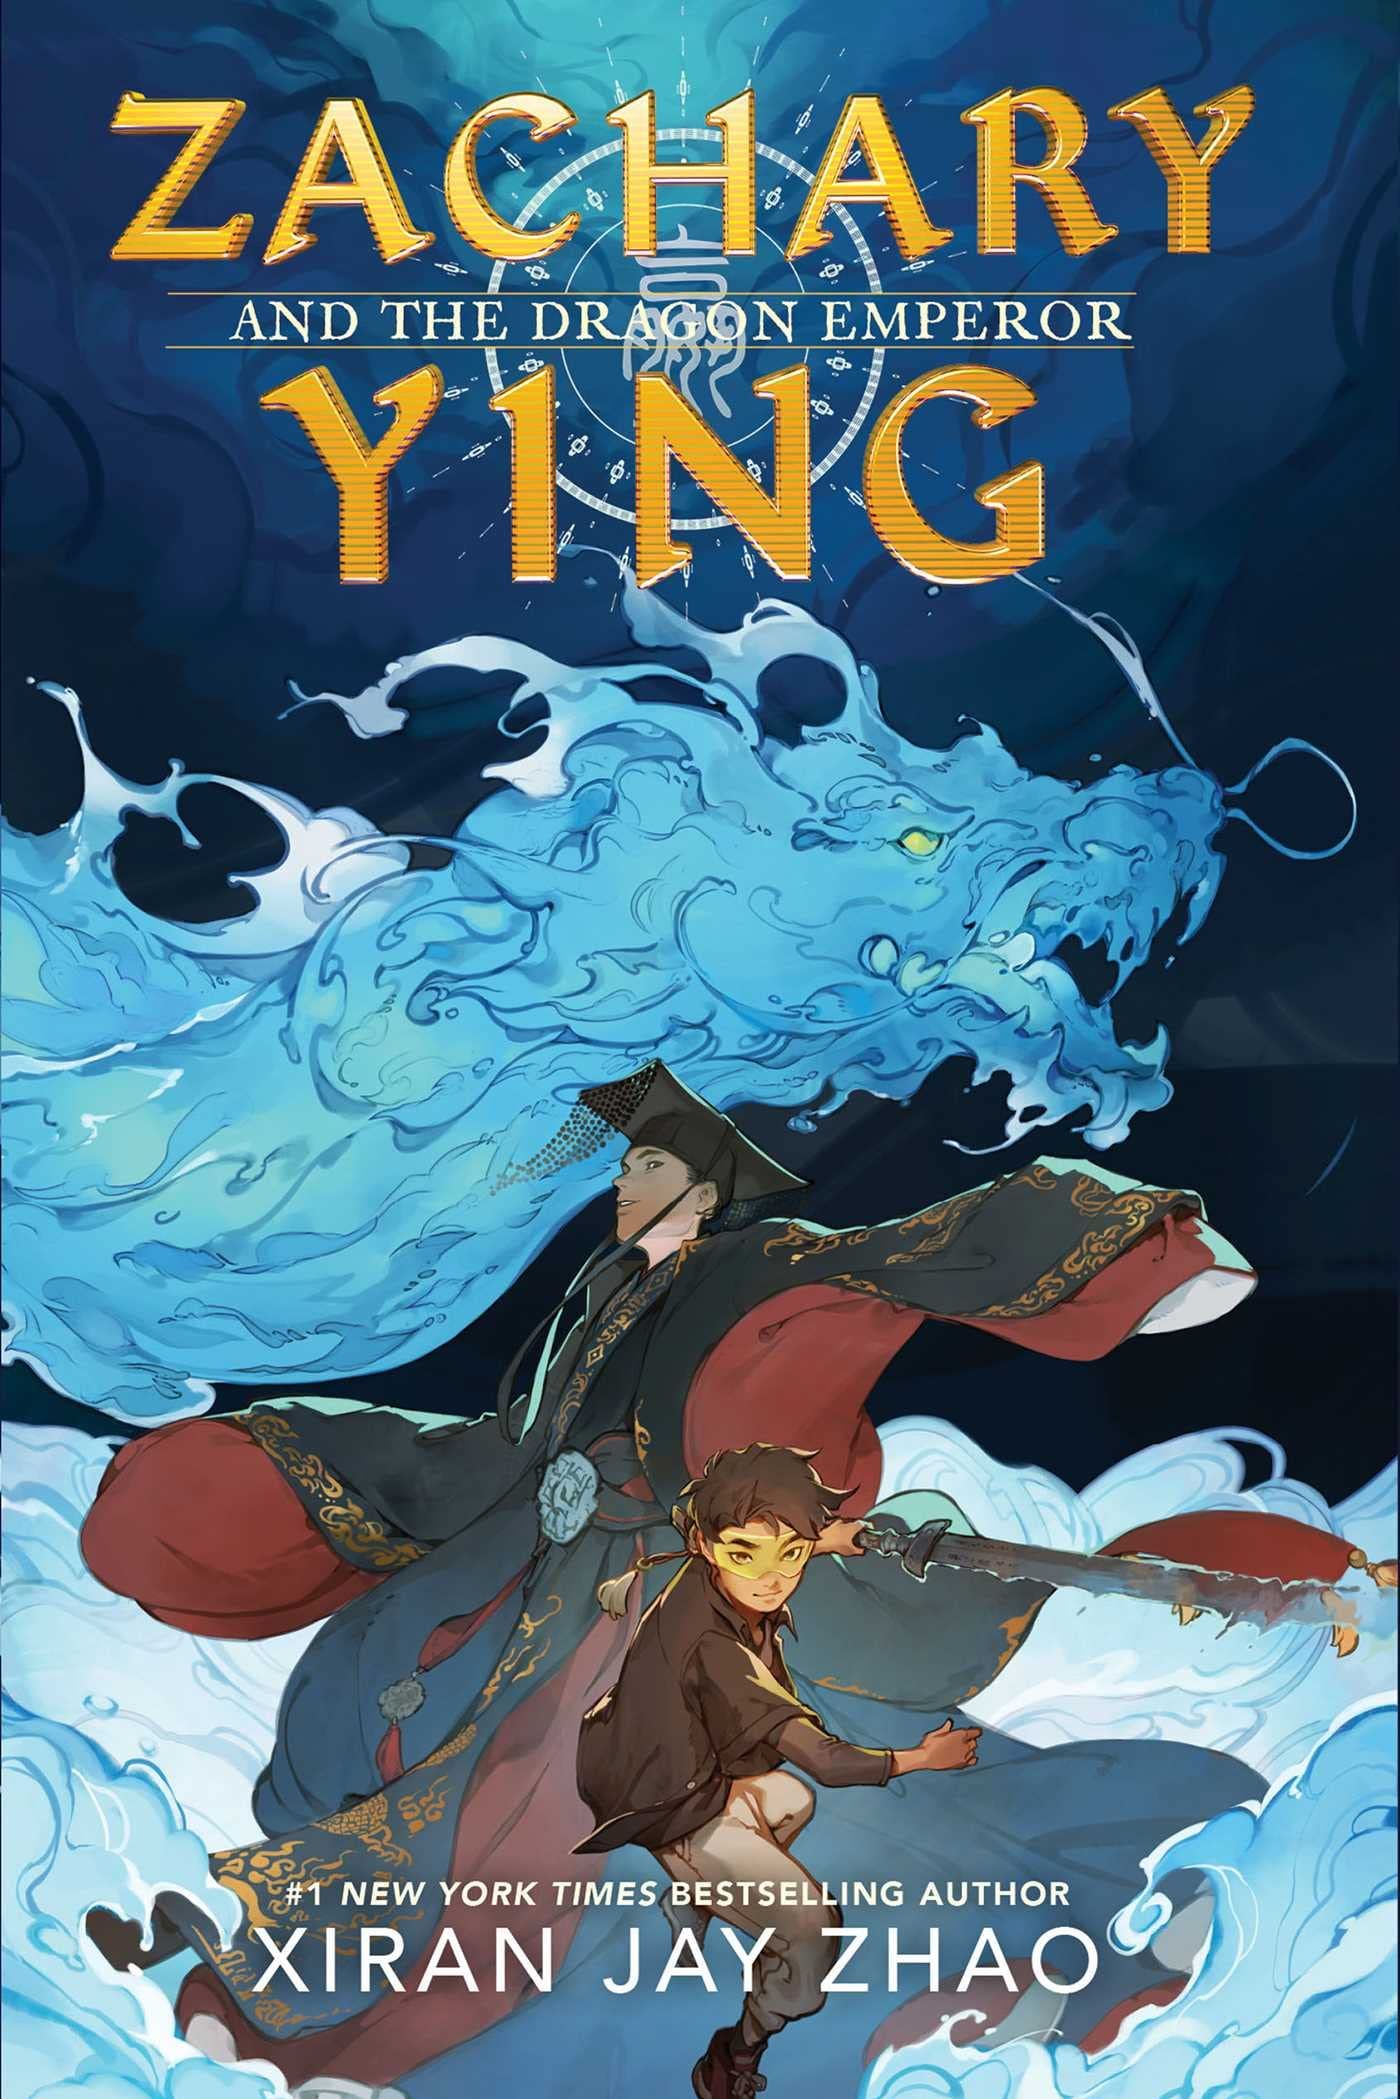 Cover of  ZACHARY YING AND THE DRAGON EMPEROR by Xiran Jay Zhao 